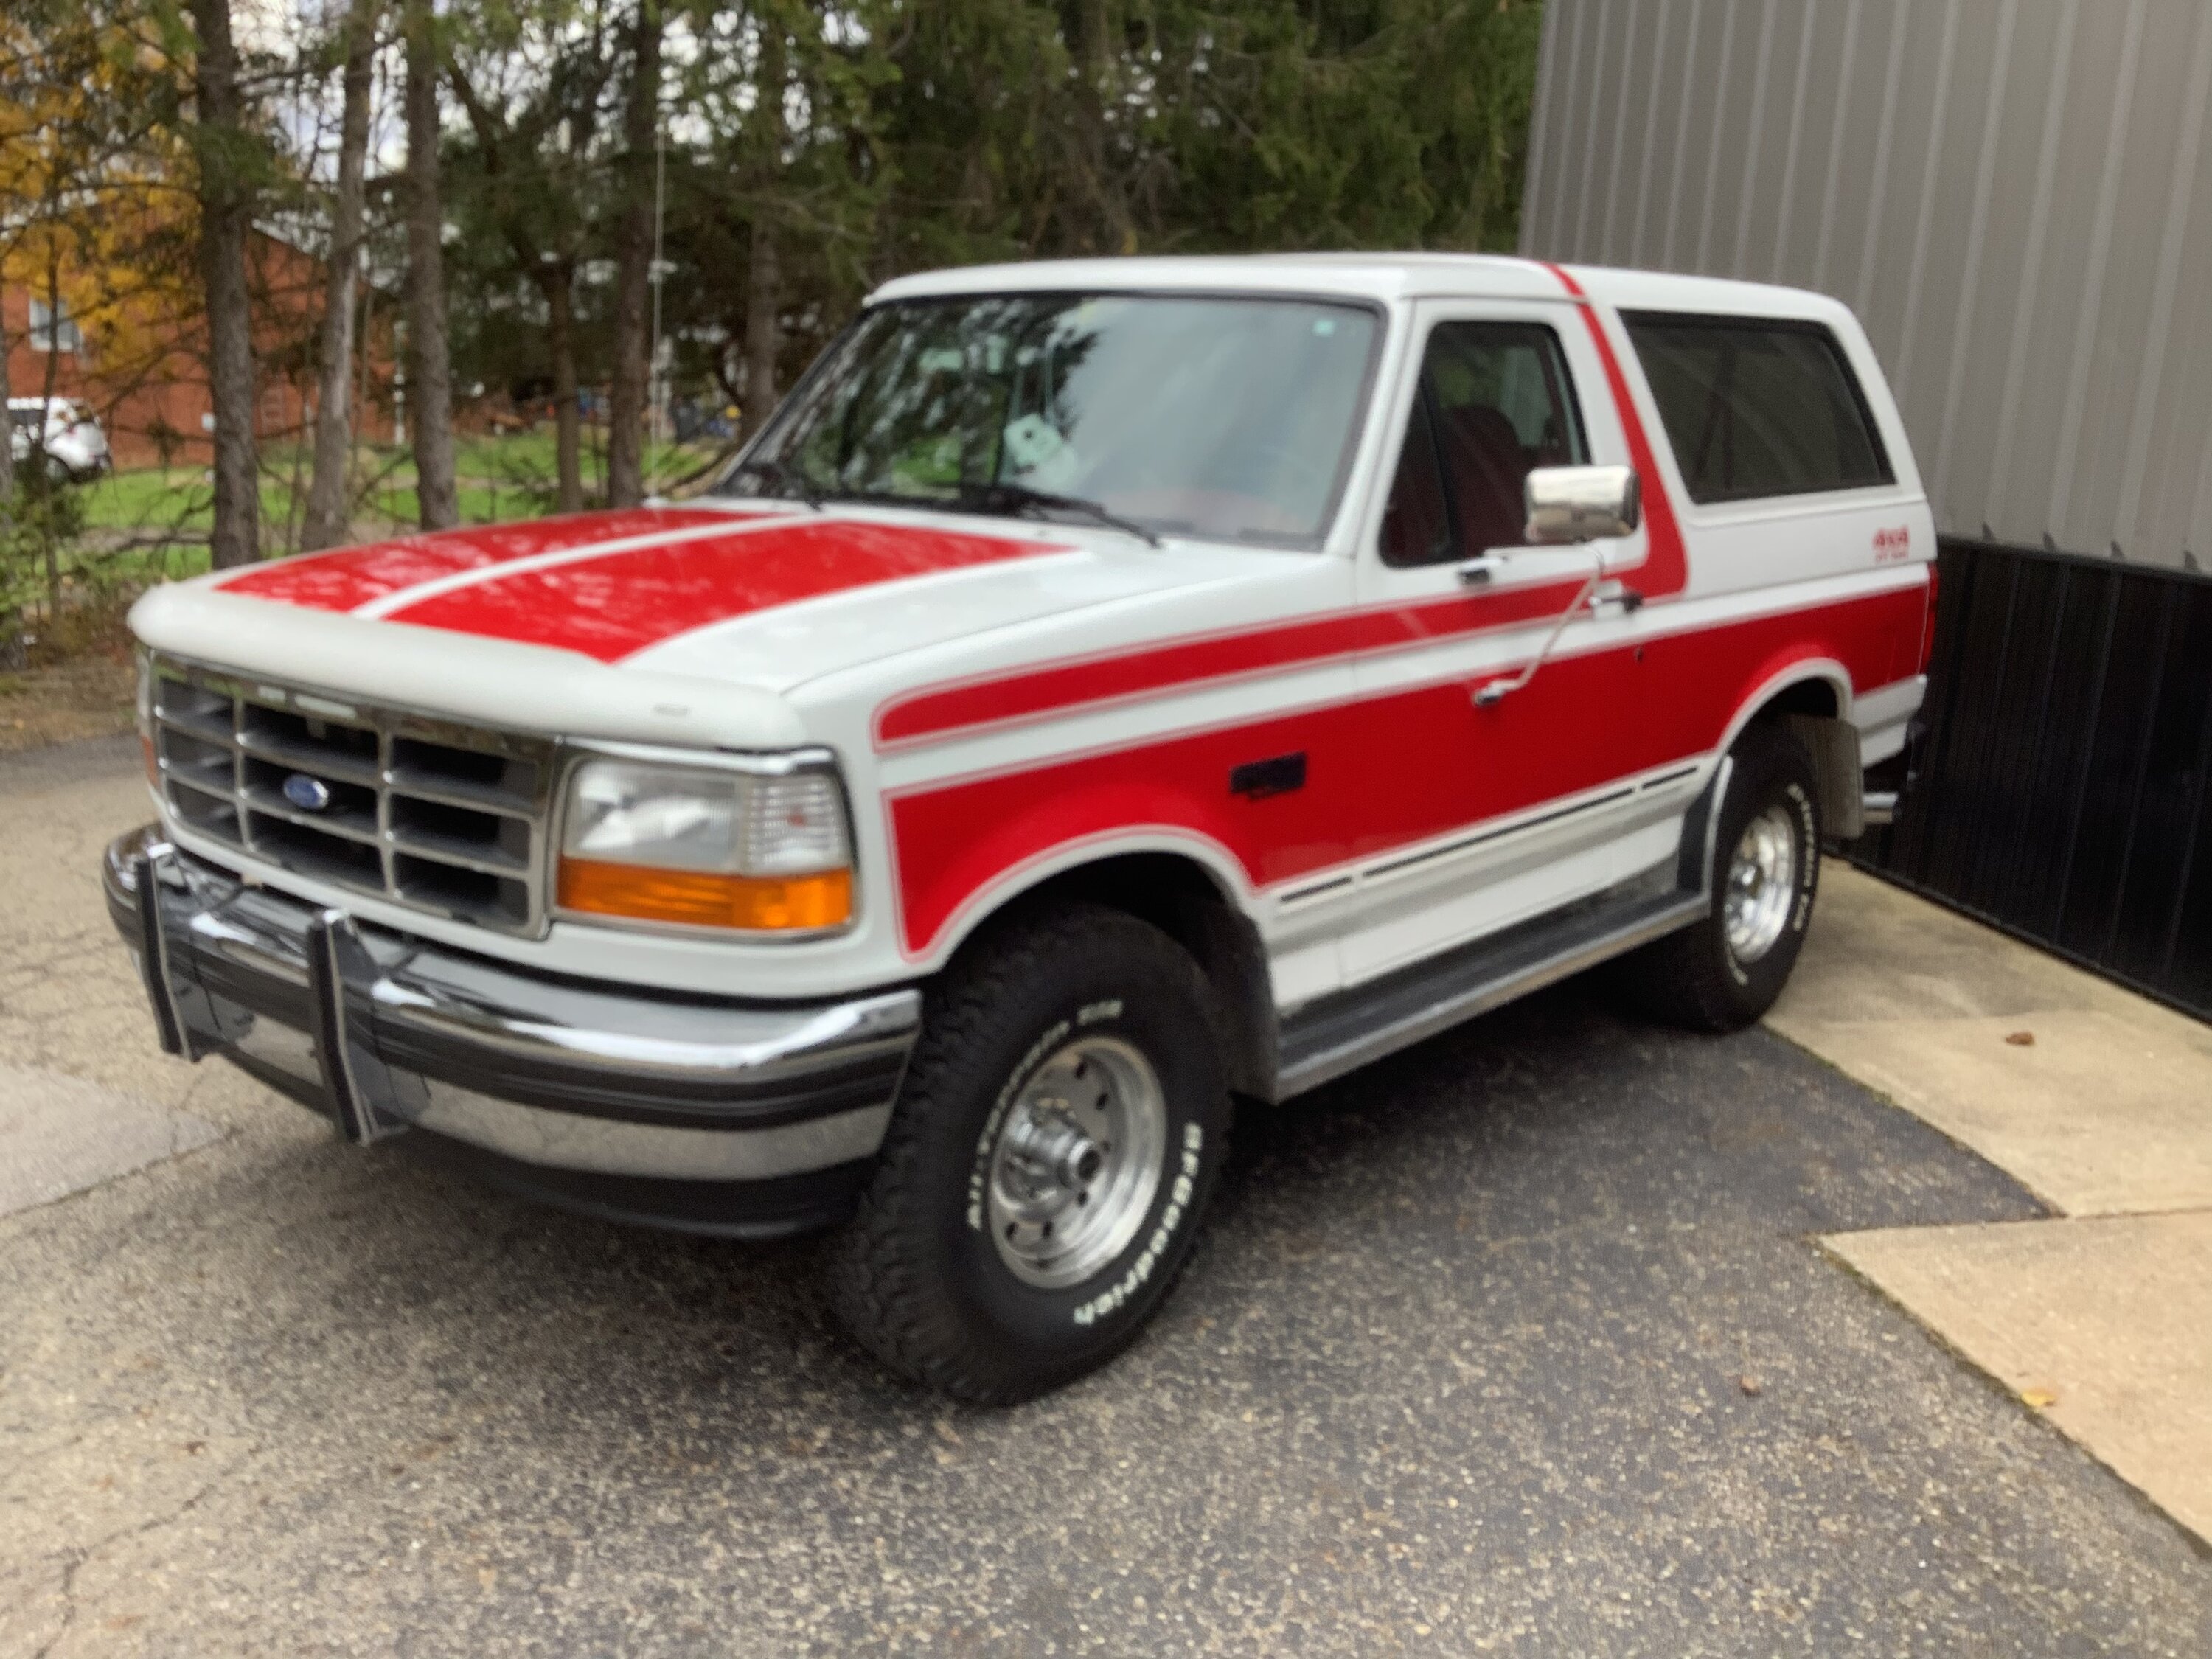 Ford Bronco what else do you ride around in(or on)? D89670FA-1C87-4103-A12A-B729AD5E5E80